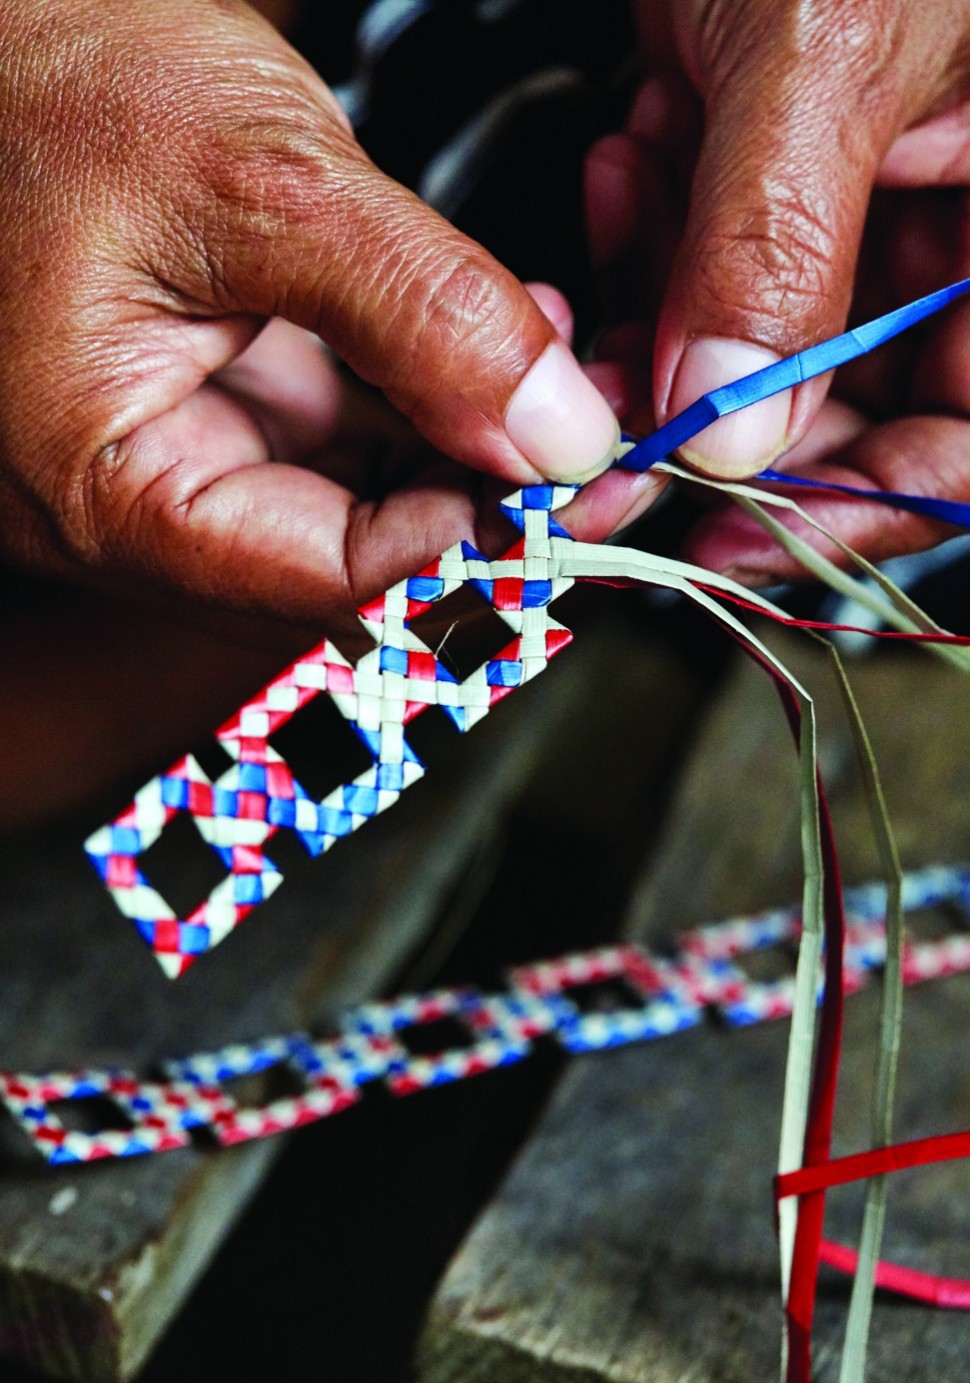 Weaving a wrist cuff, one of the customised items for Malaysia Airlines